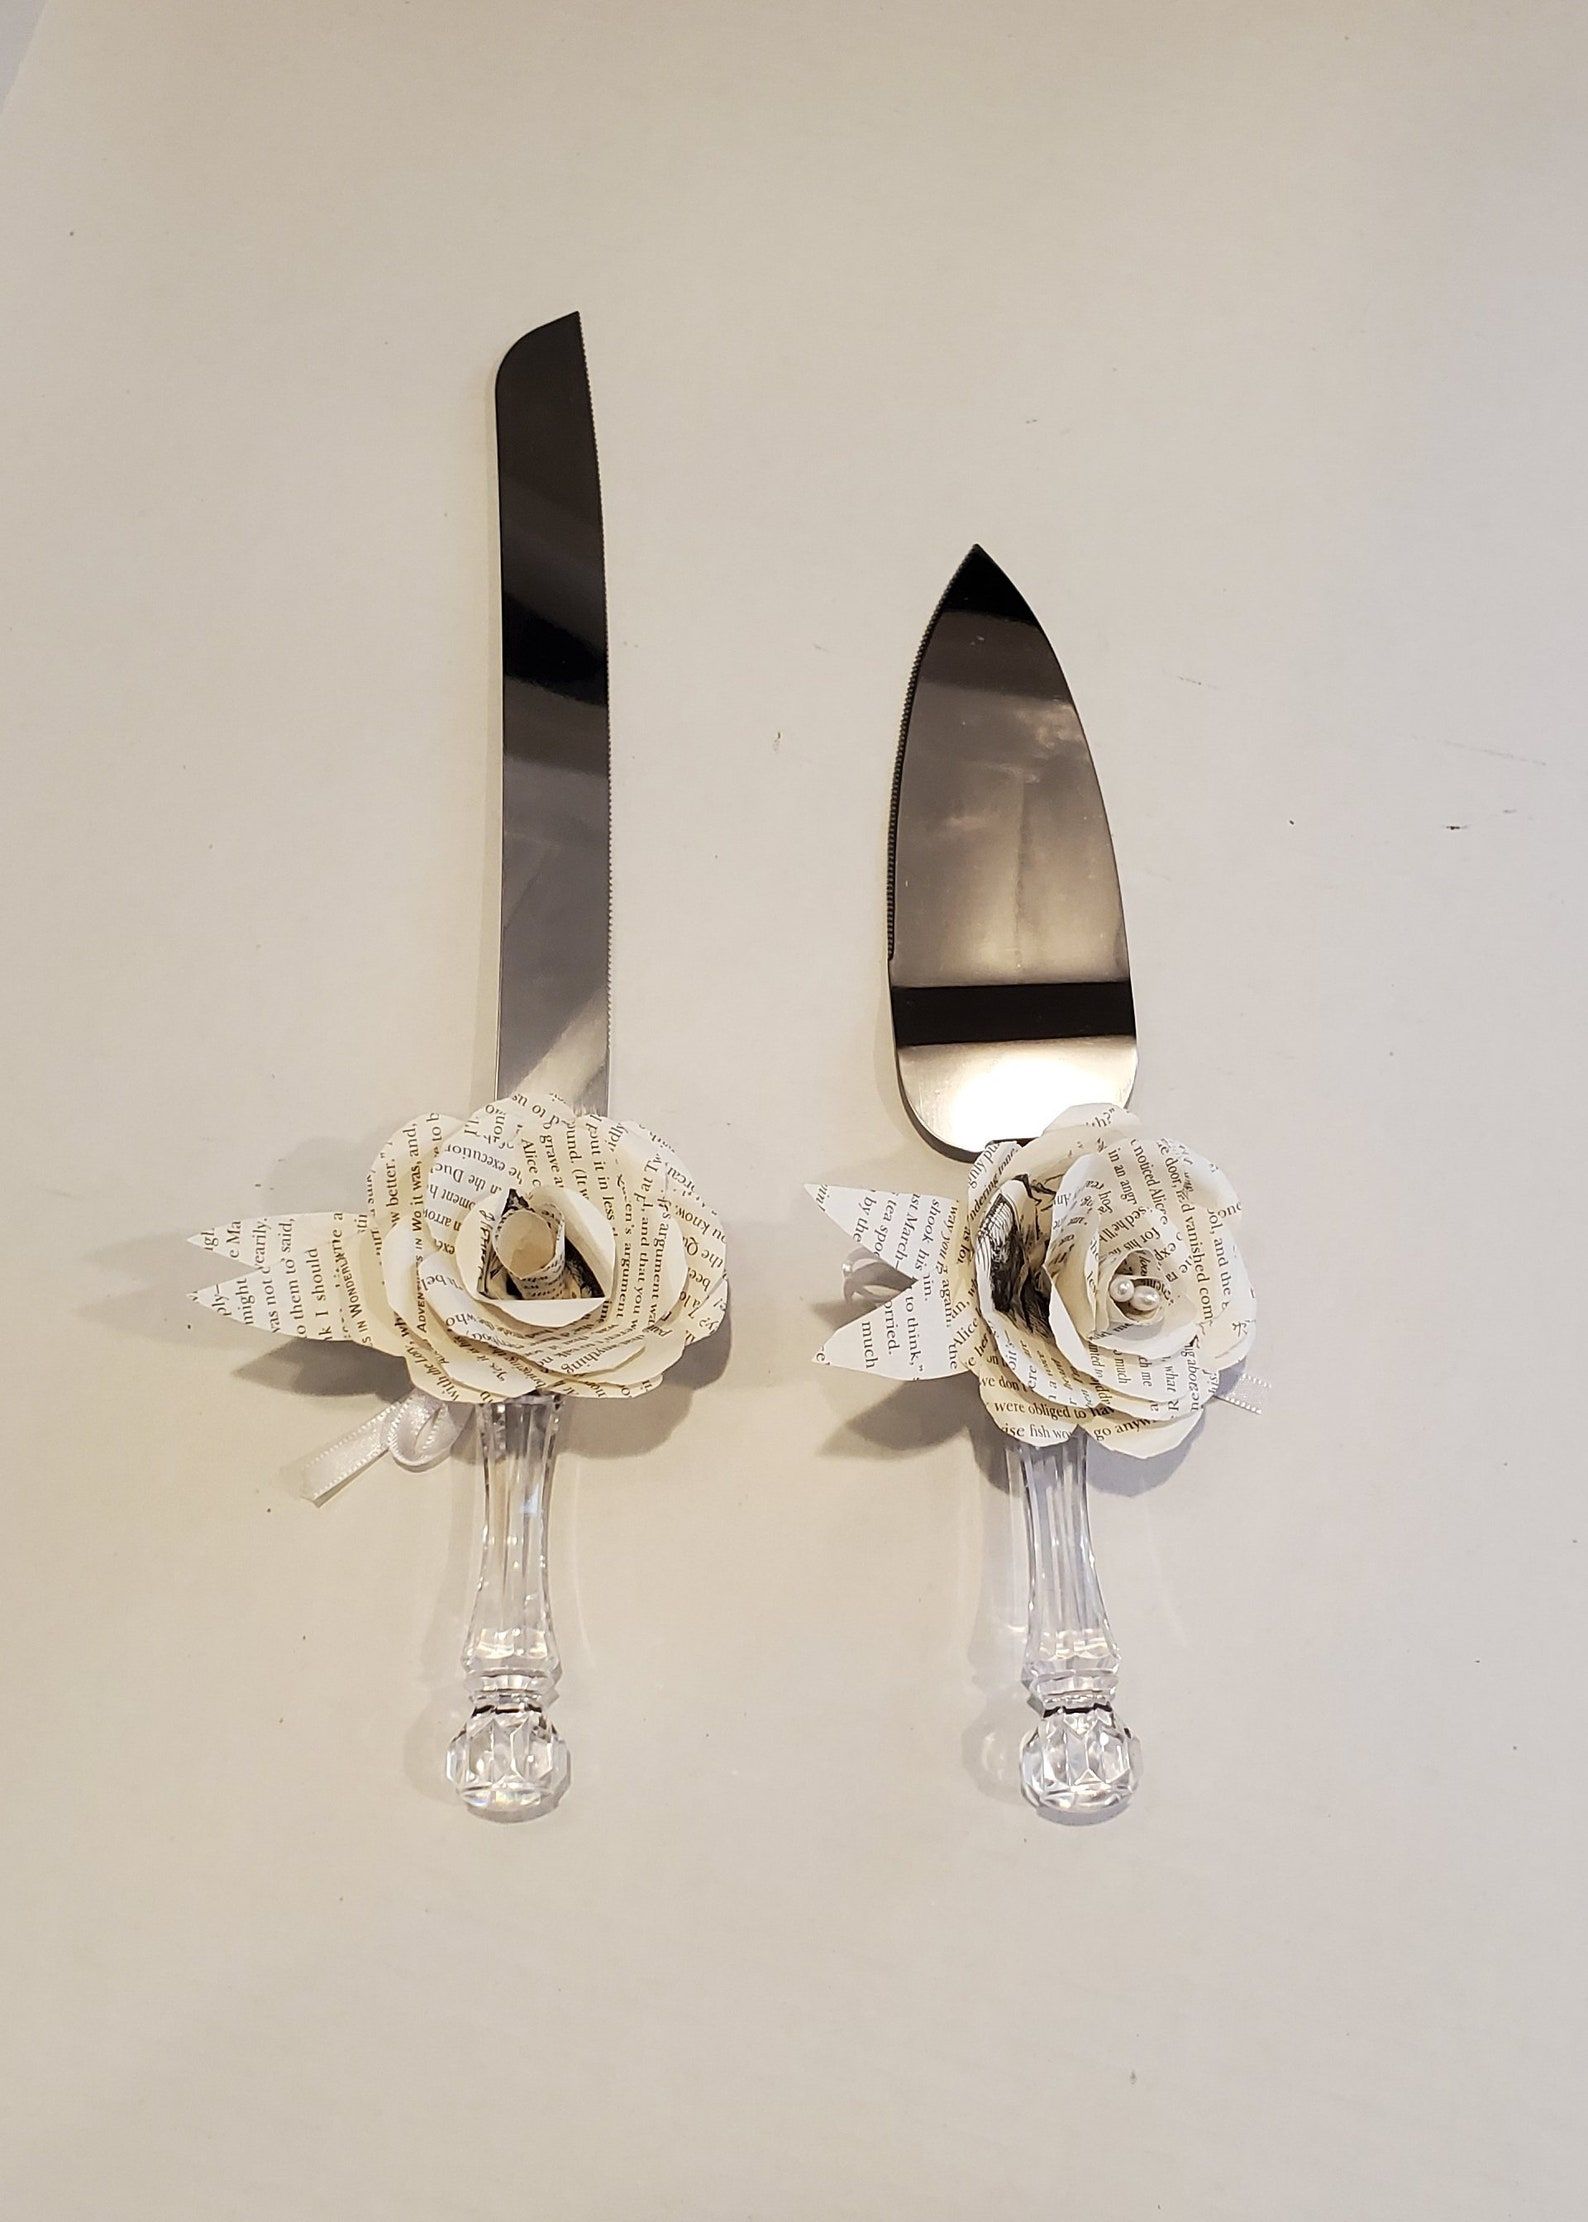 An overhead shot of a cake knife and a cake server. They are plated server with clear handles. On the necks of both utensils is a paper flower made out of pages of books 